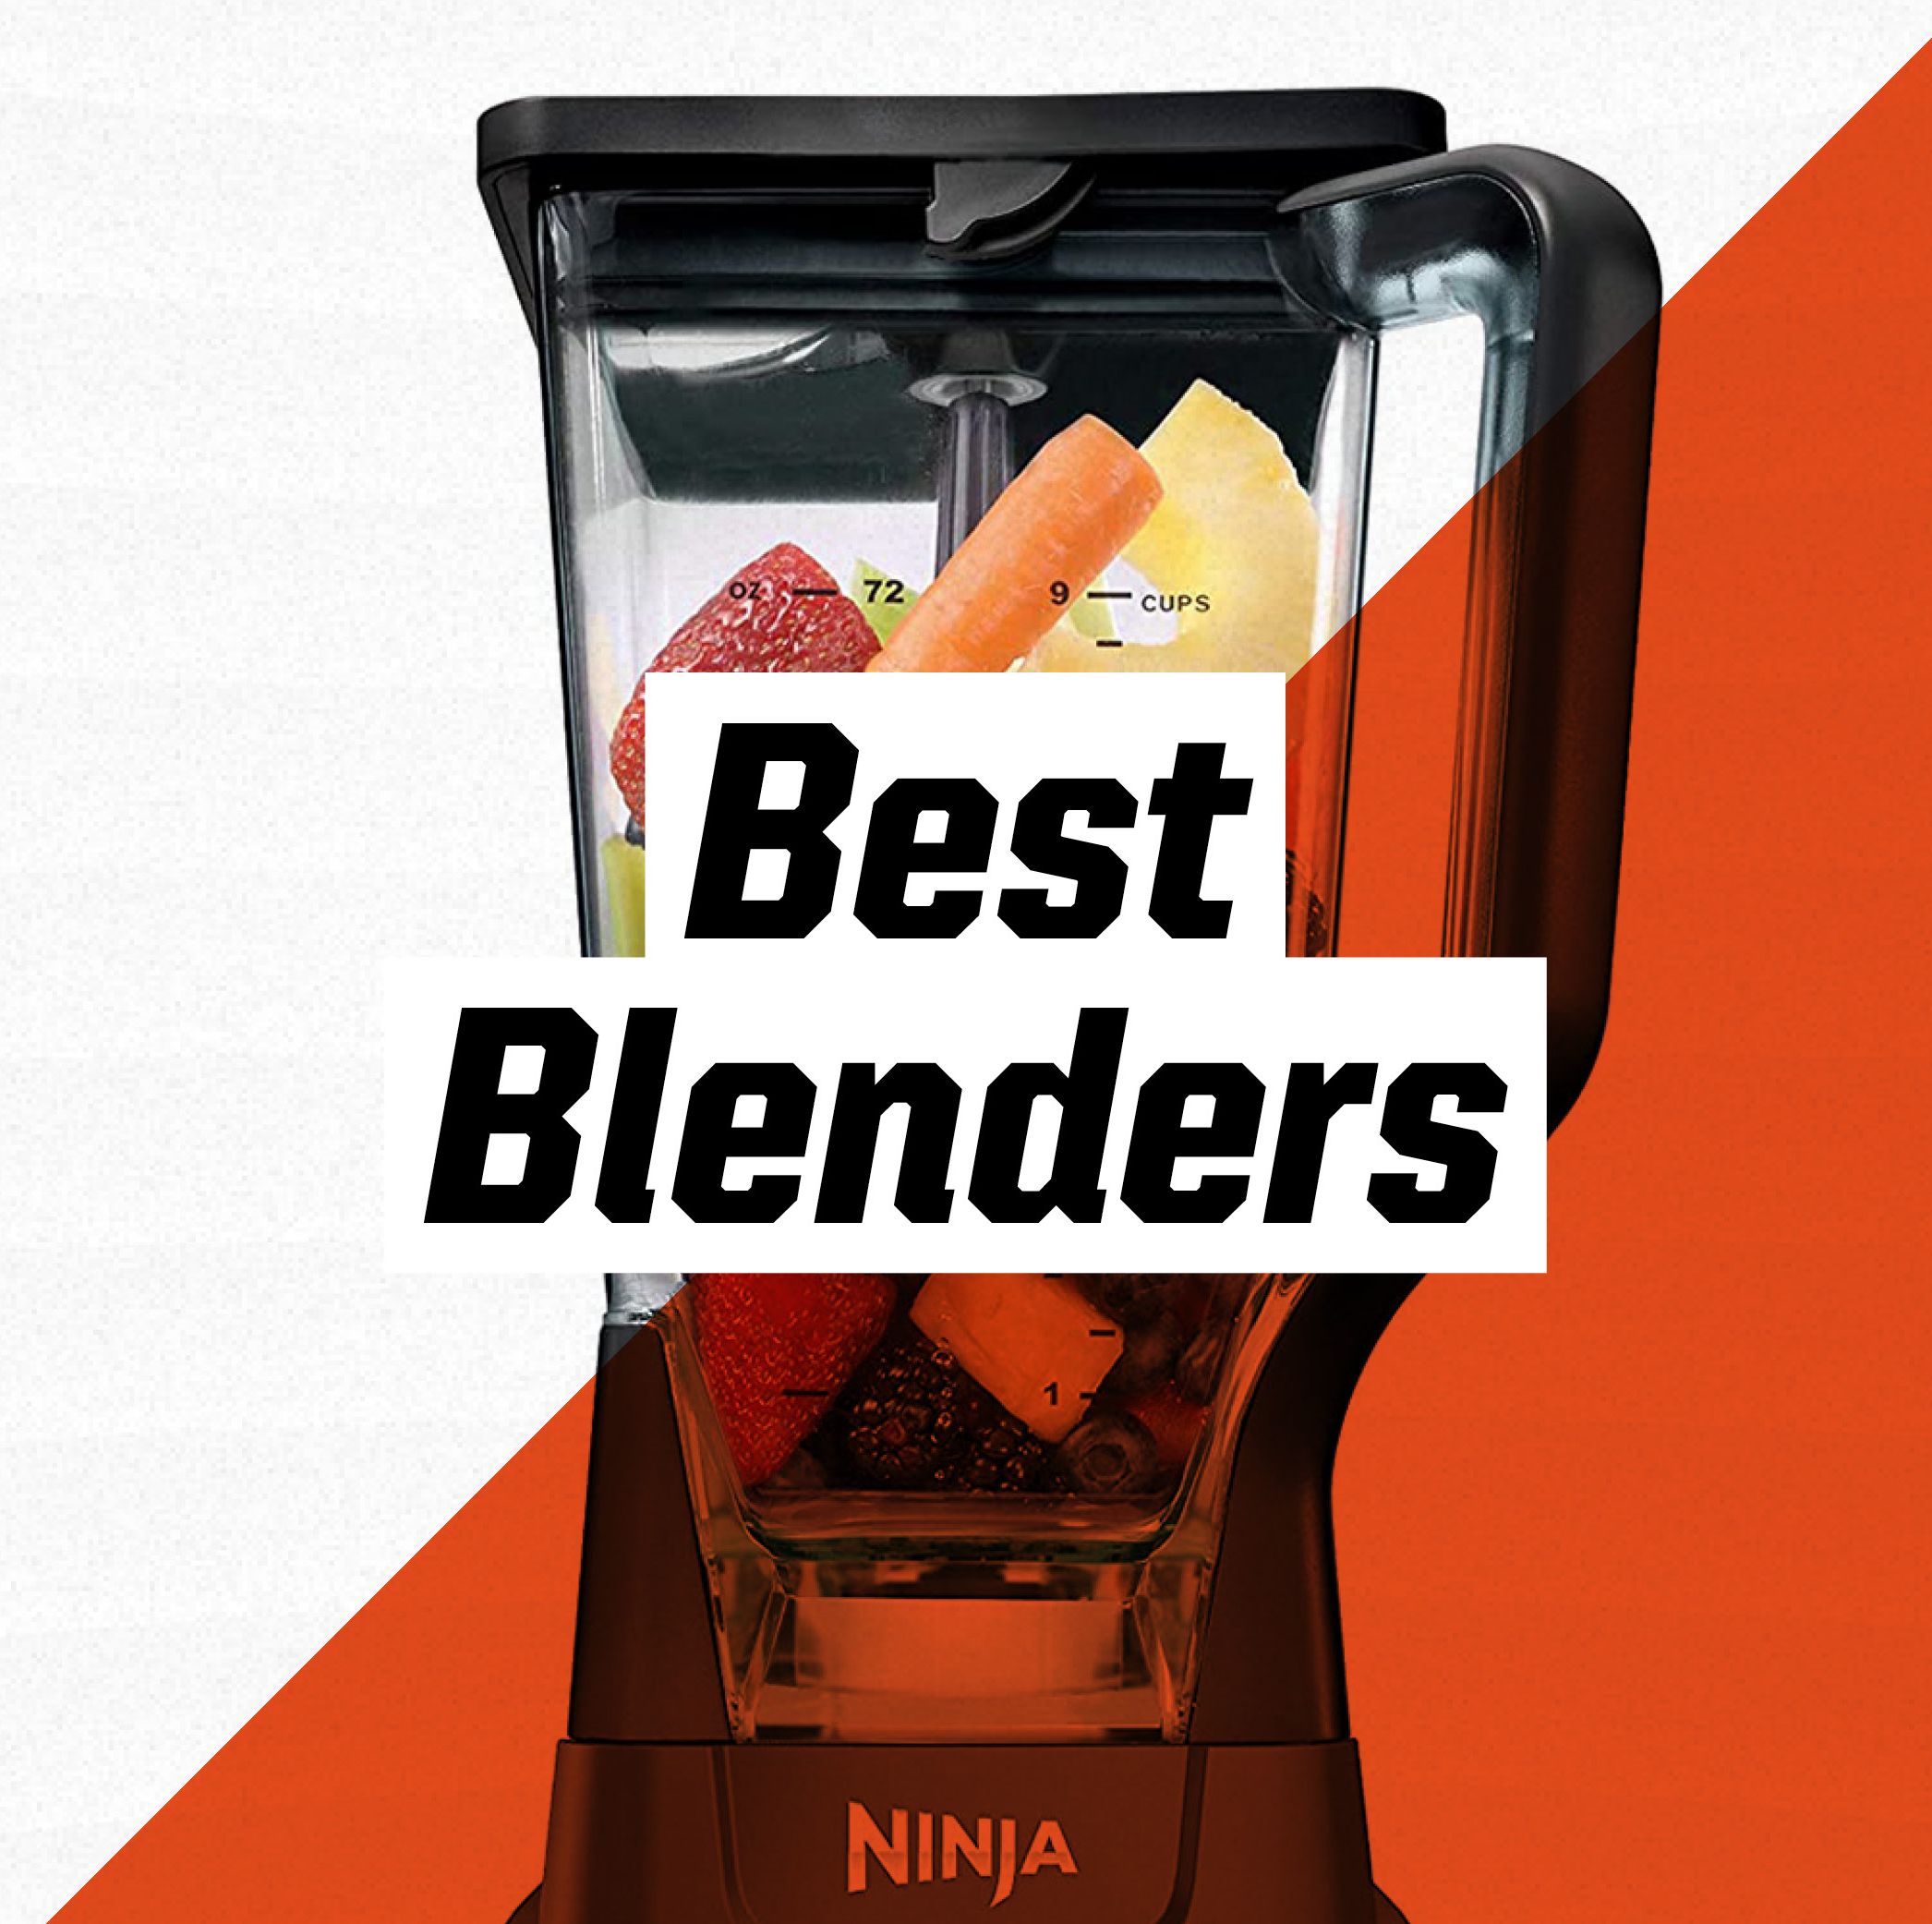 The Best Blenders for Smoothies, Shakes, Soups, and More